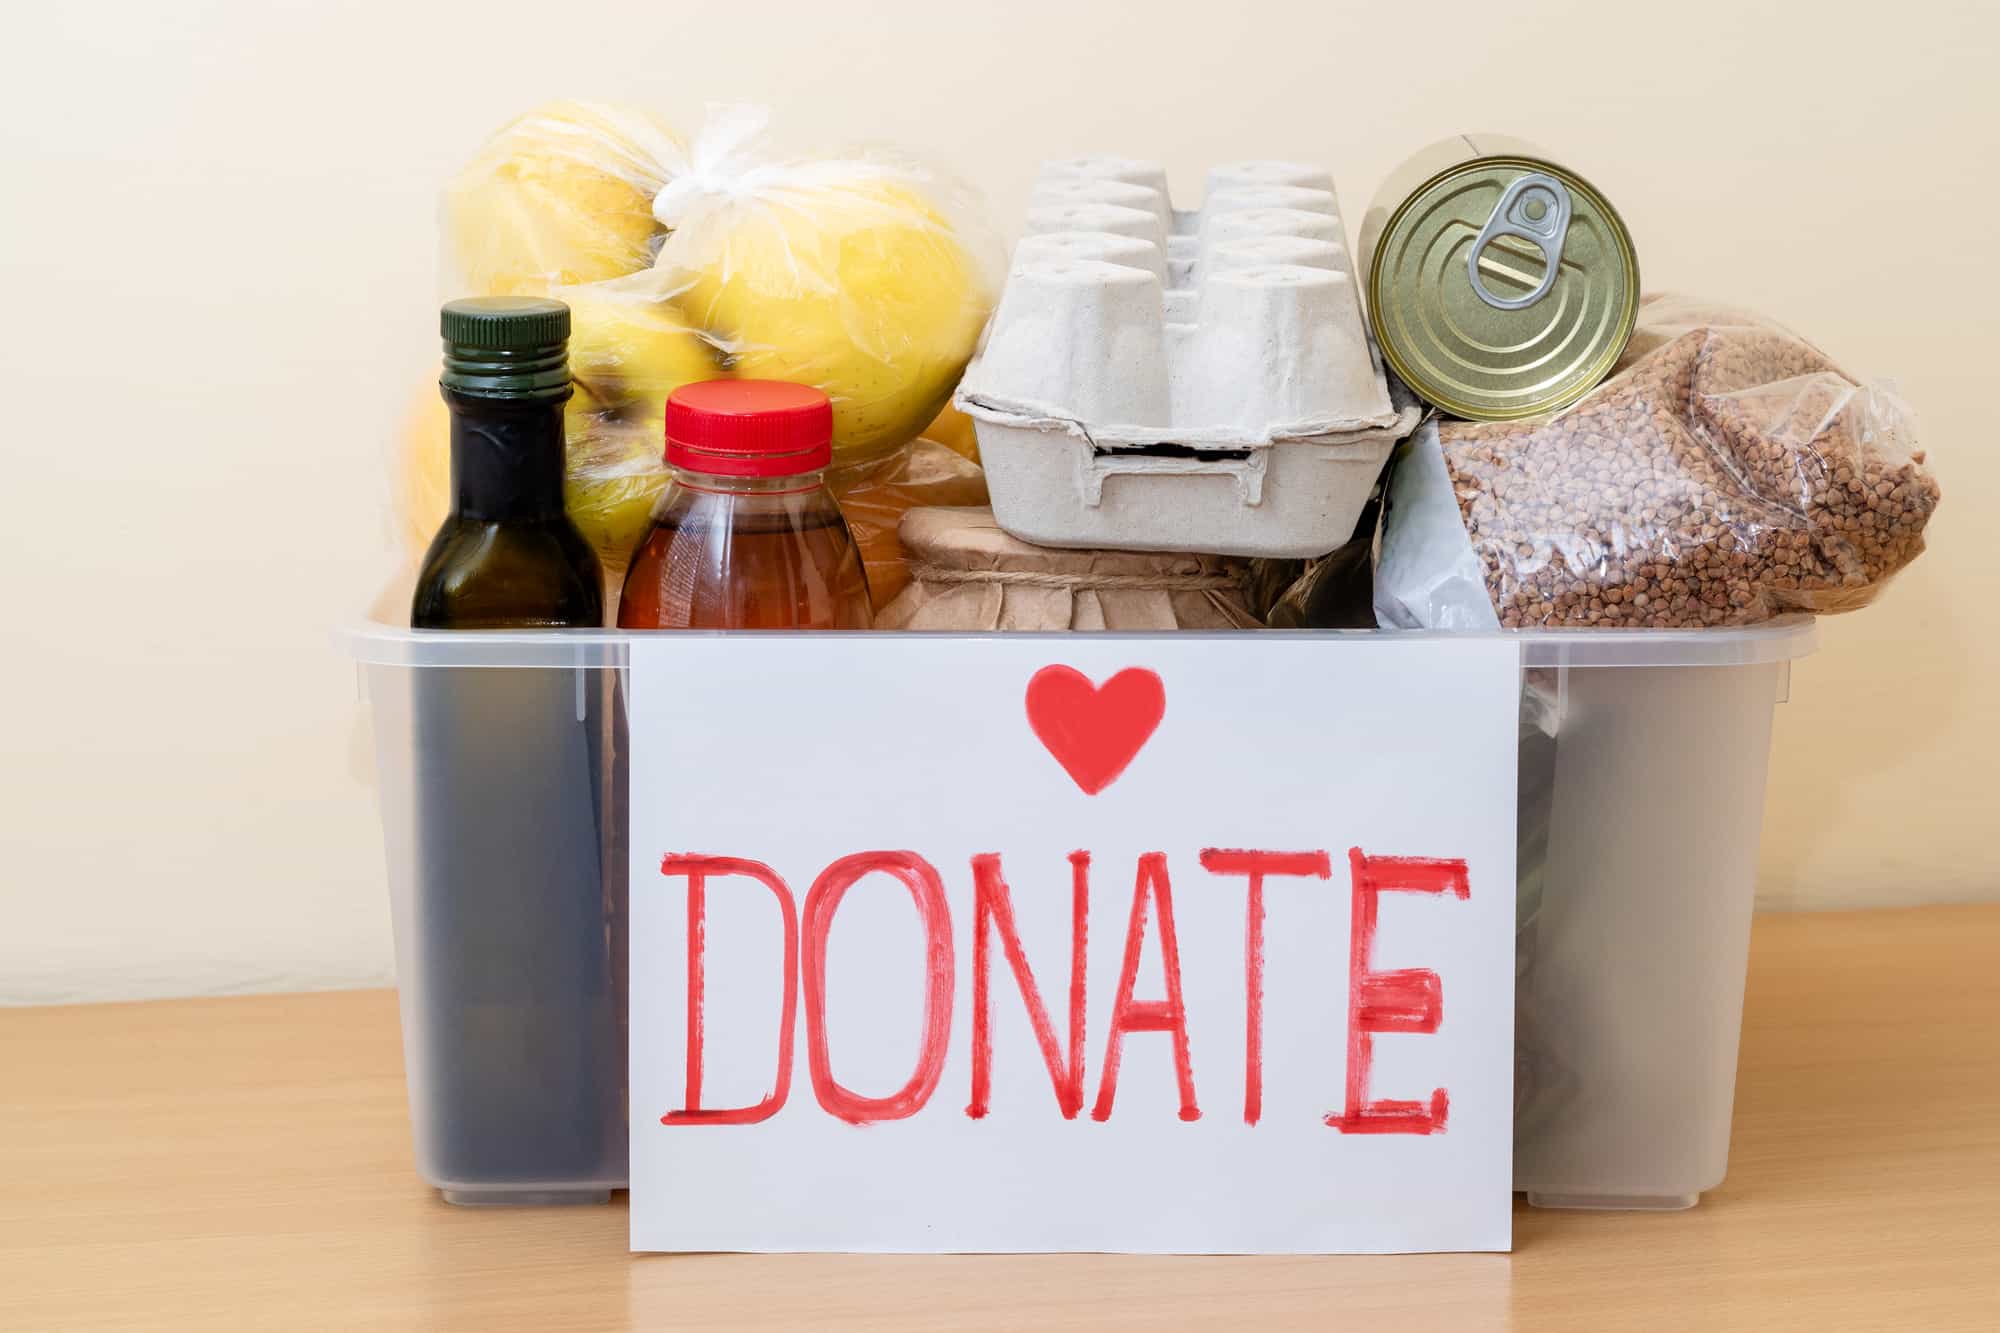 Donation food box. Fund charity products. Donate